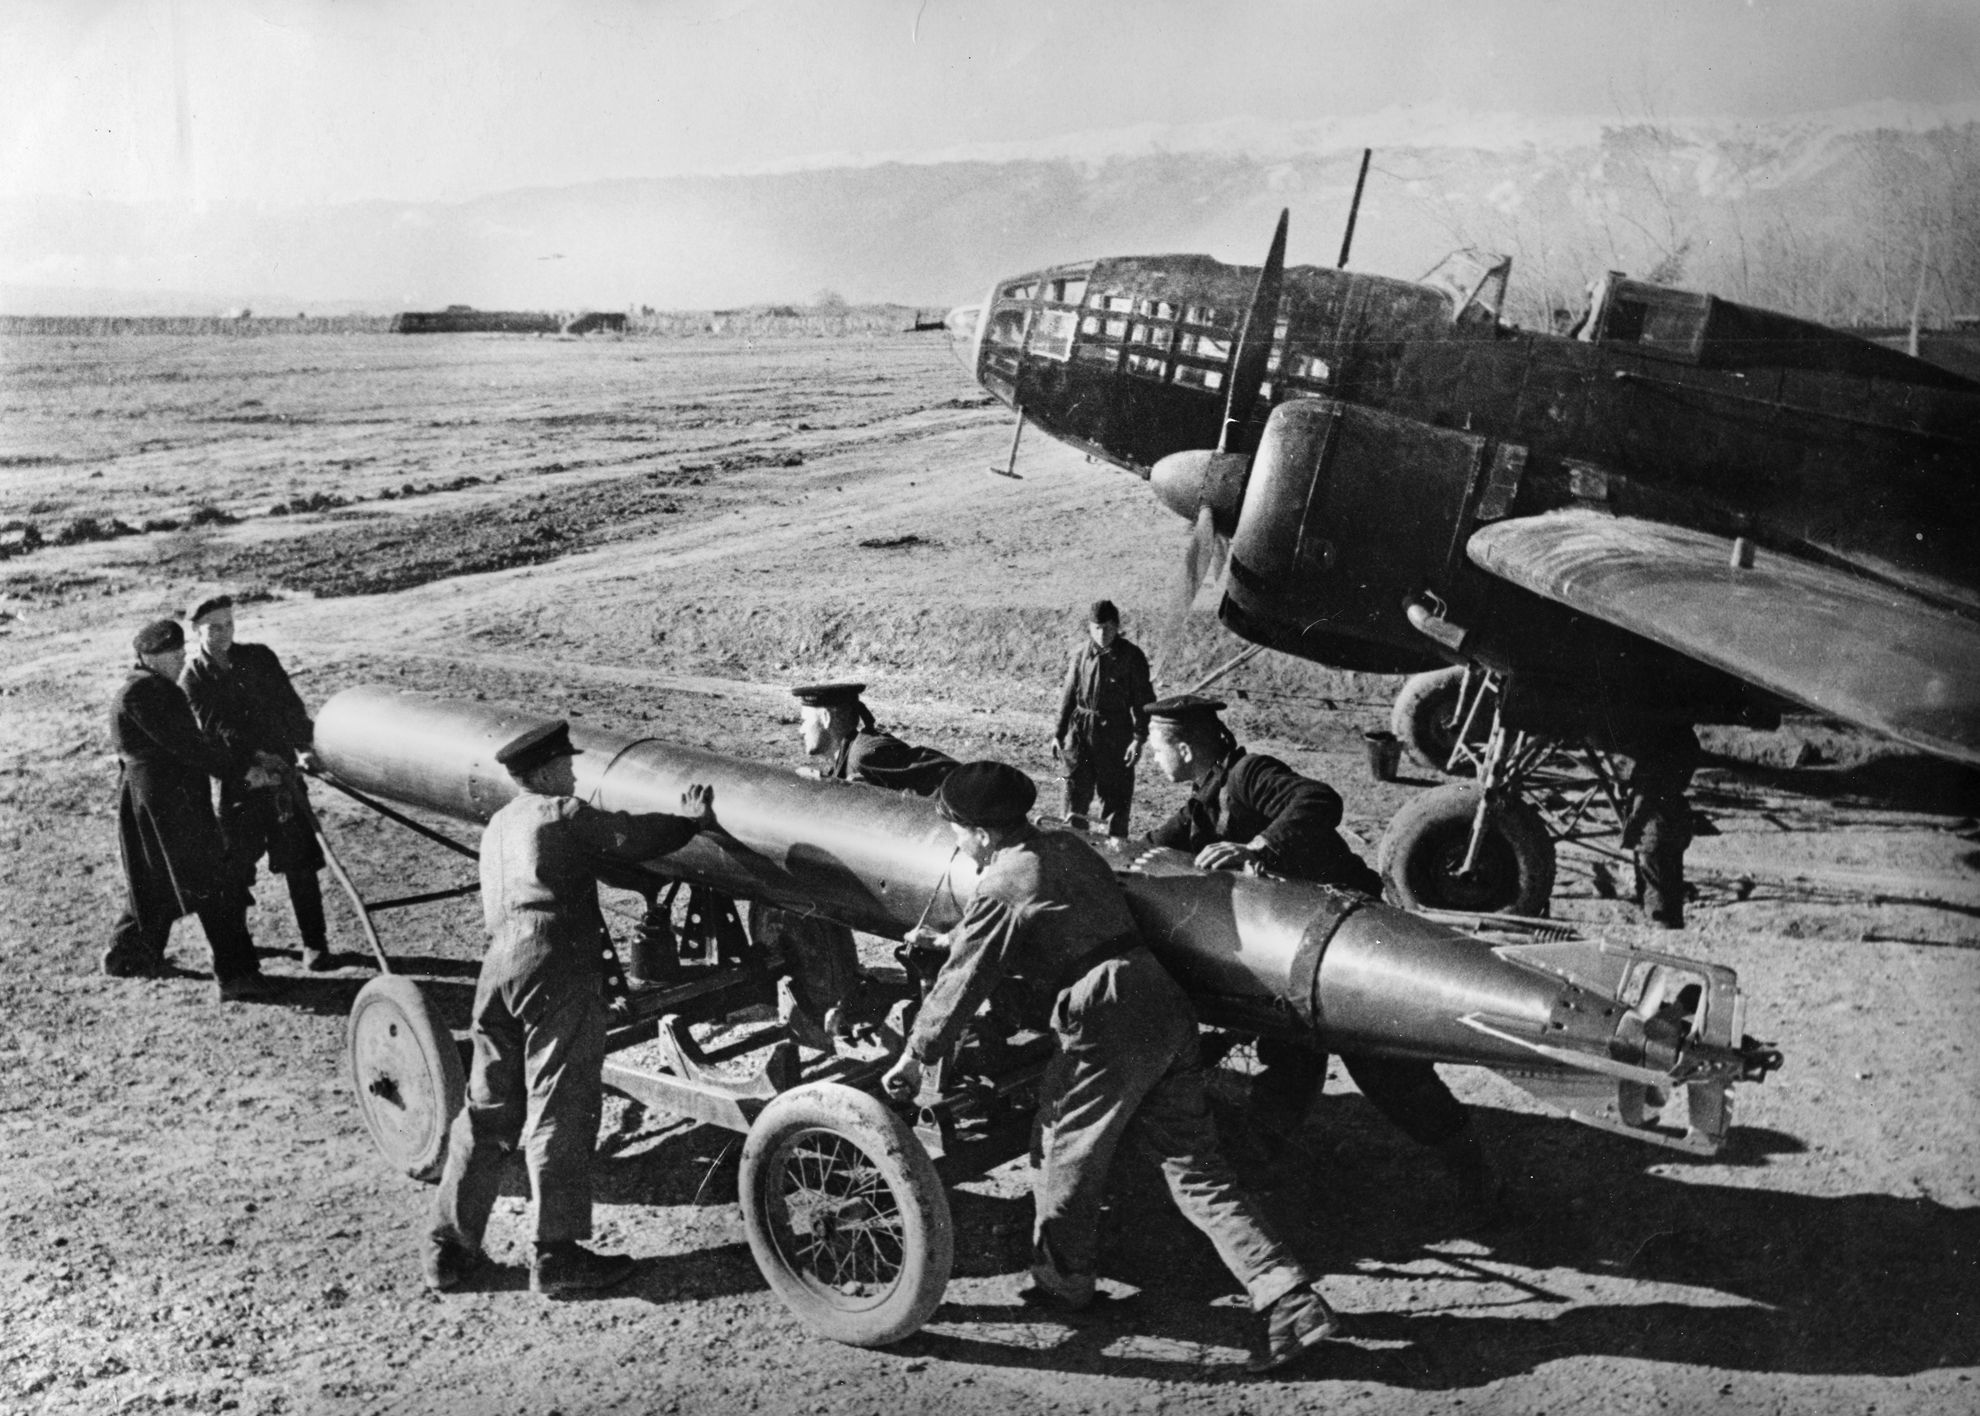 Soviet ground crewmen load a torpedo onto the versatile Ilyushin Il-4 twin-engined bomber. The Il-4 served as the backbone of the Soviet bomber corps throughout World War II.  